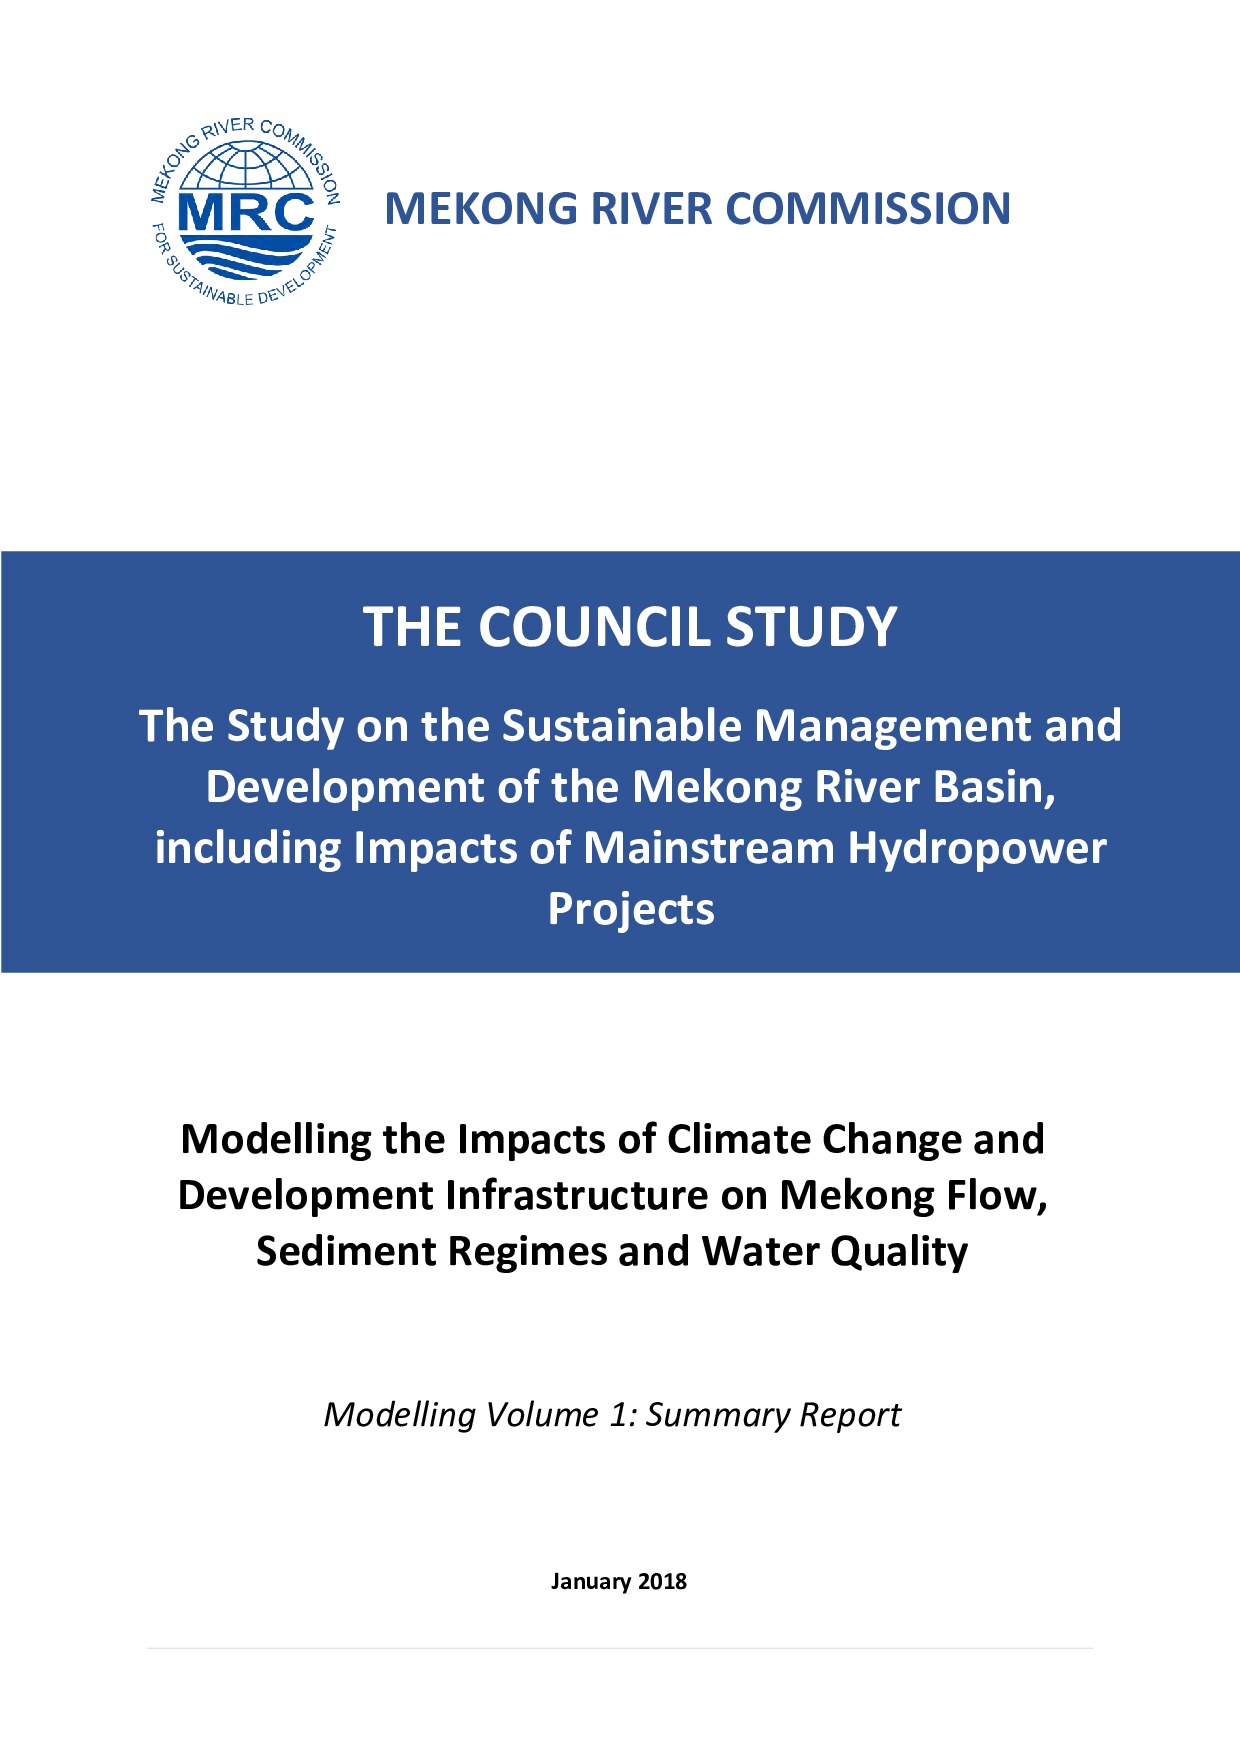 Modelling the Impacts of Climate Change and Development Infrastructure on Mekong Flow, Sediment Regimes and Water Quality